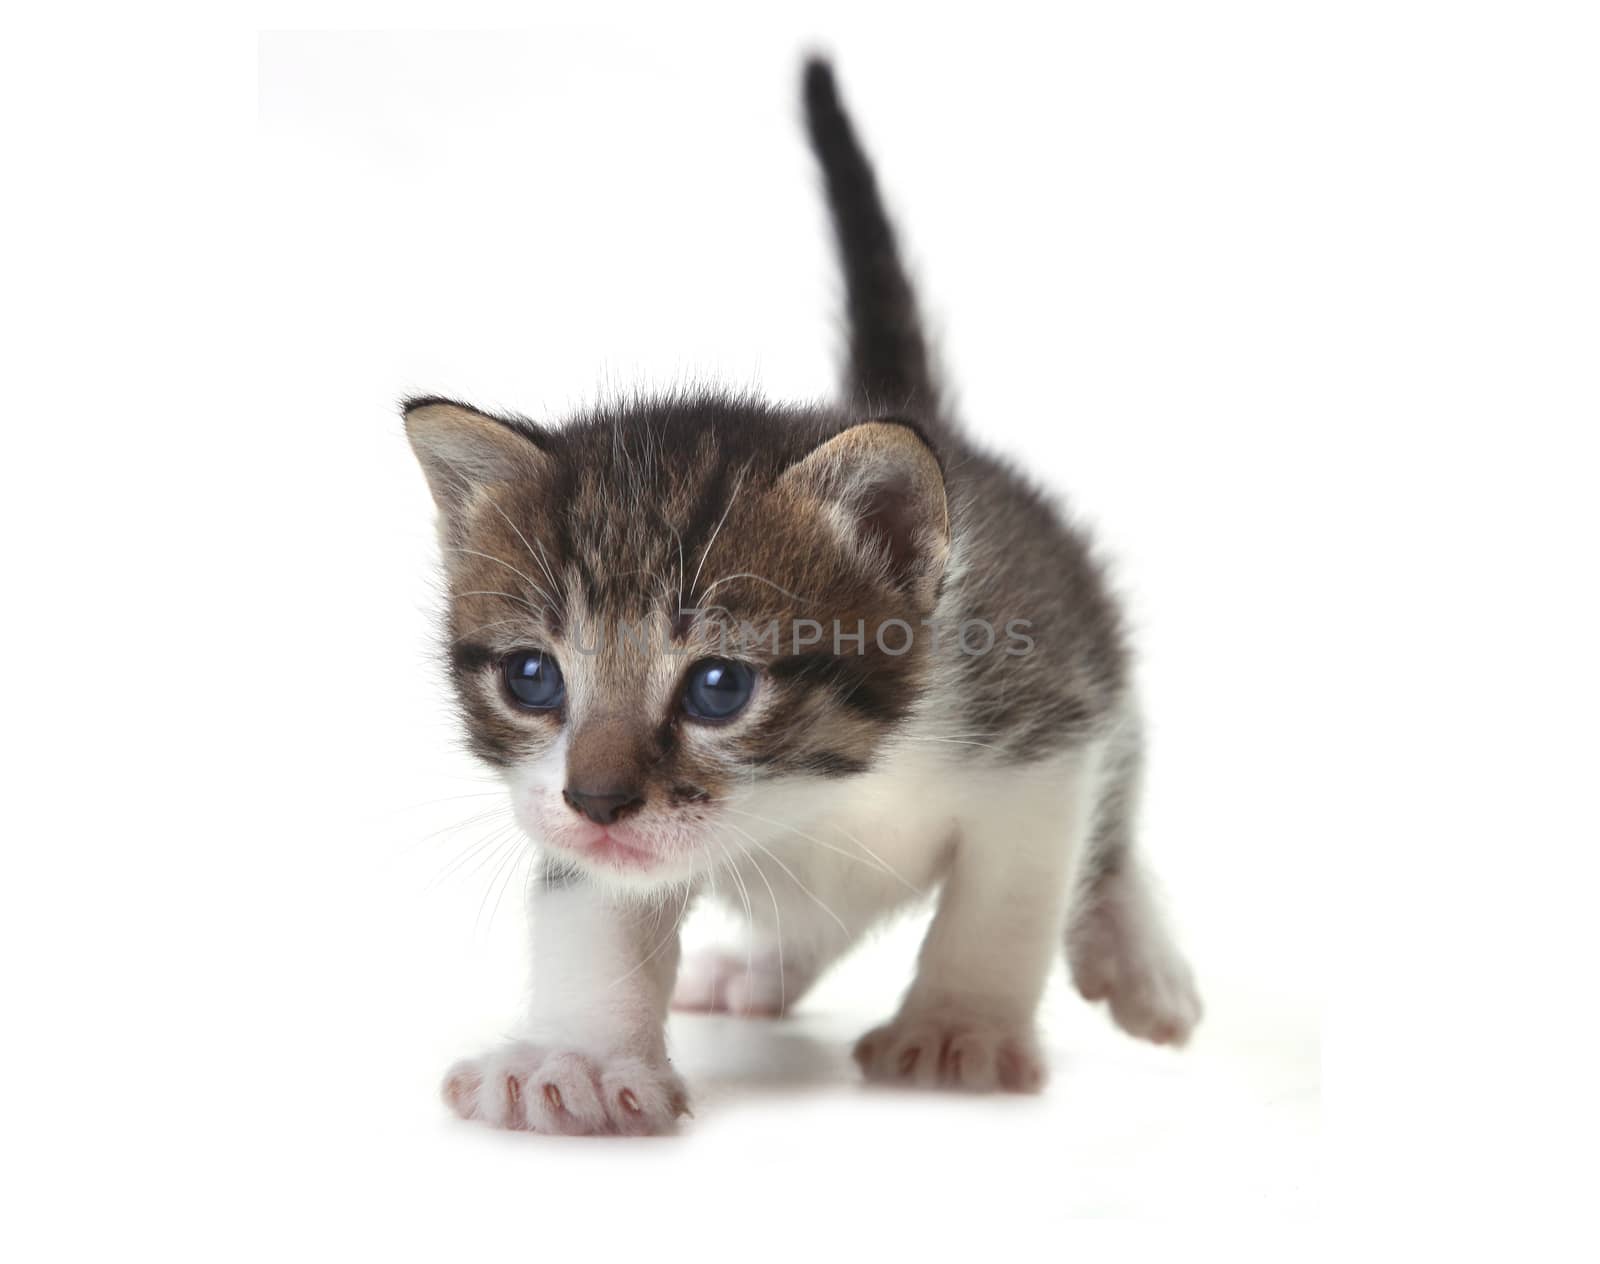 Adorable Cute Kitten on a White Background